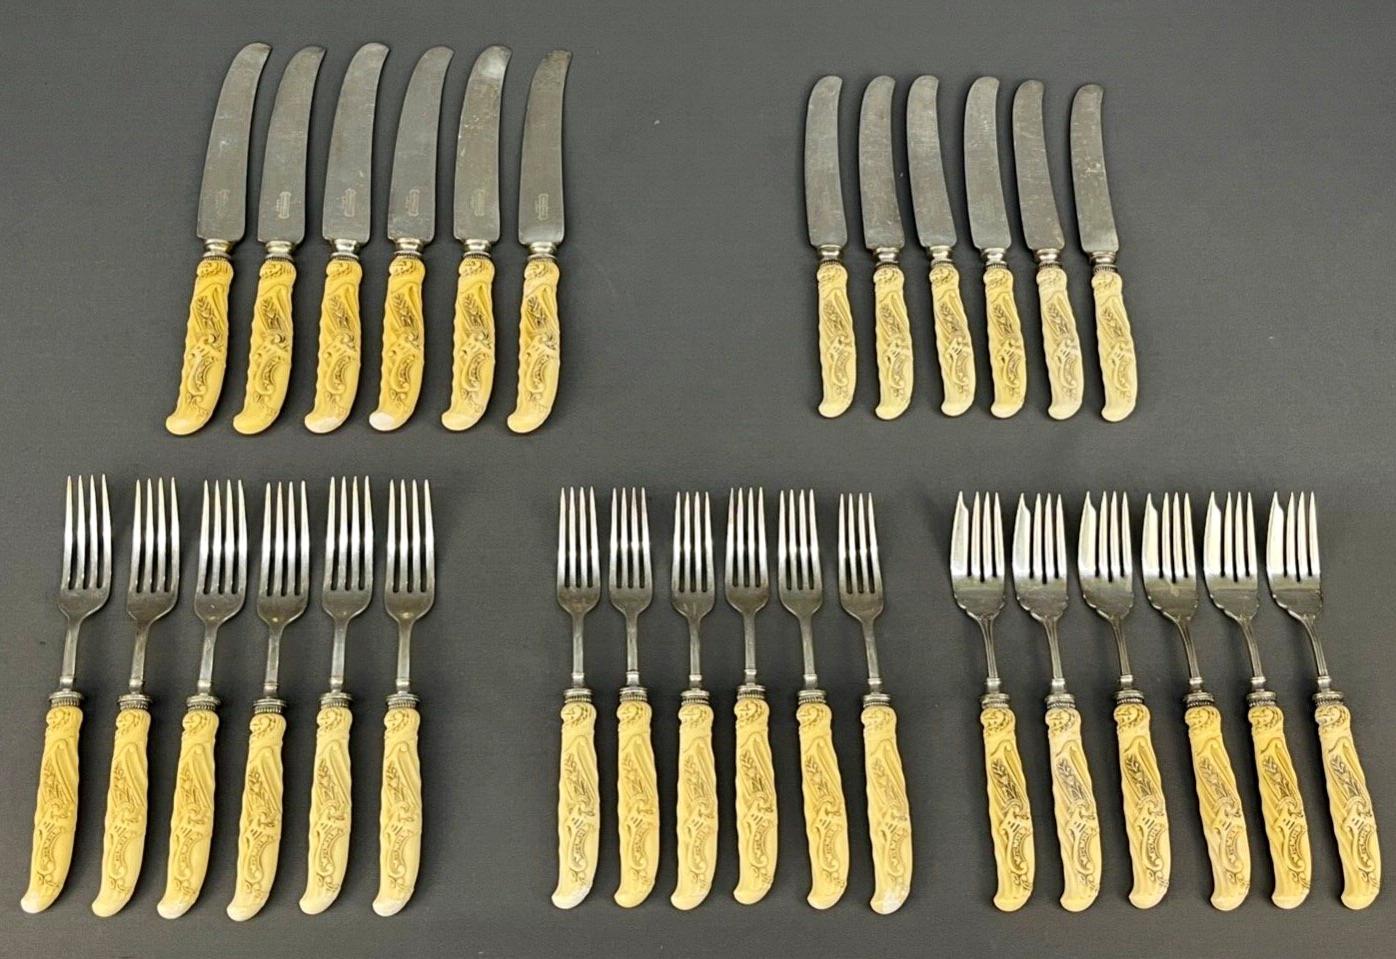 From the makers, Landers, Frary & Clark, a set of 30 table knives and forks with carved, ivory colored Celluloid handles, circa 1900-1920.

Landers, Frary & Clark was a housewares company established in 1862 and based in New Britain, Connecticut.